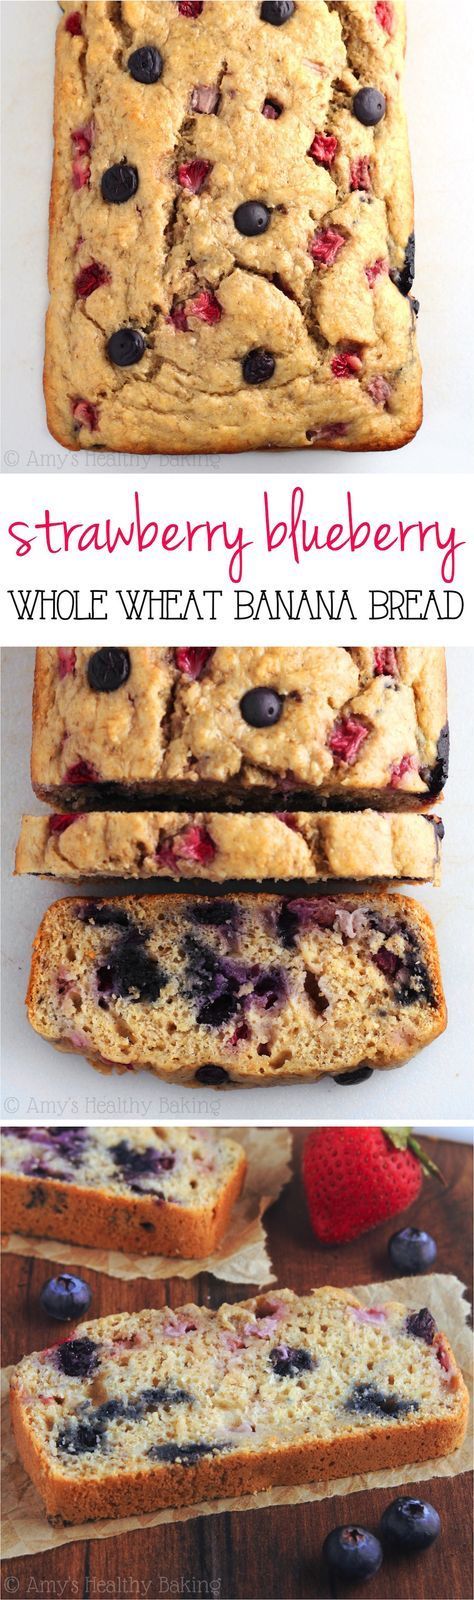 Whole Wheat Strawberry Blueberry Banana Bread — an easy clean-eating breakfast or snack! This healthy